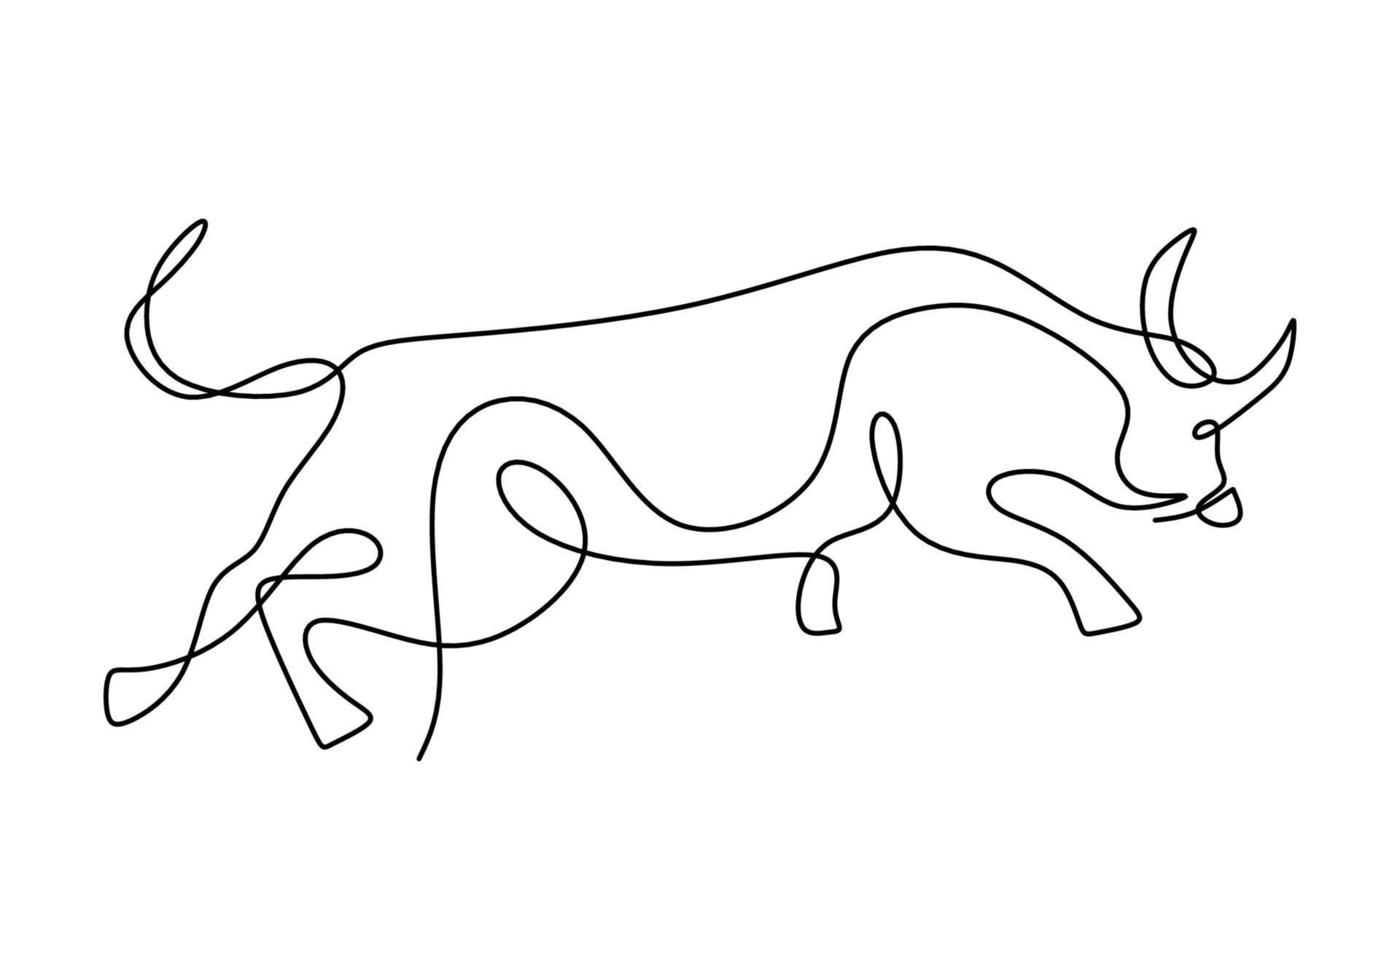 Continuous drawing of a bull symbol of 2021. Year of the Ox drawn in a modern minimalist style isolated on white background. Abstract ox, bull, cow. Happy new year 2021. Vector illustration